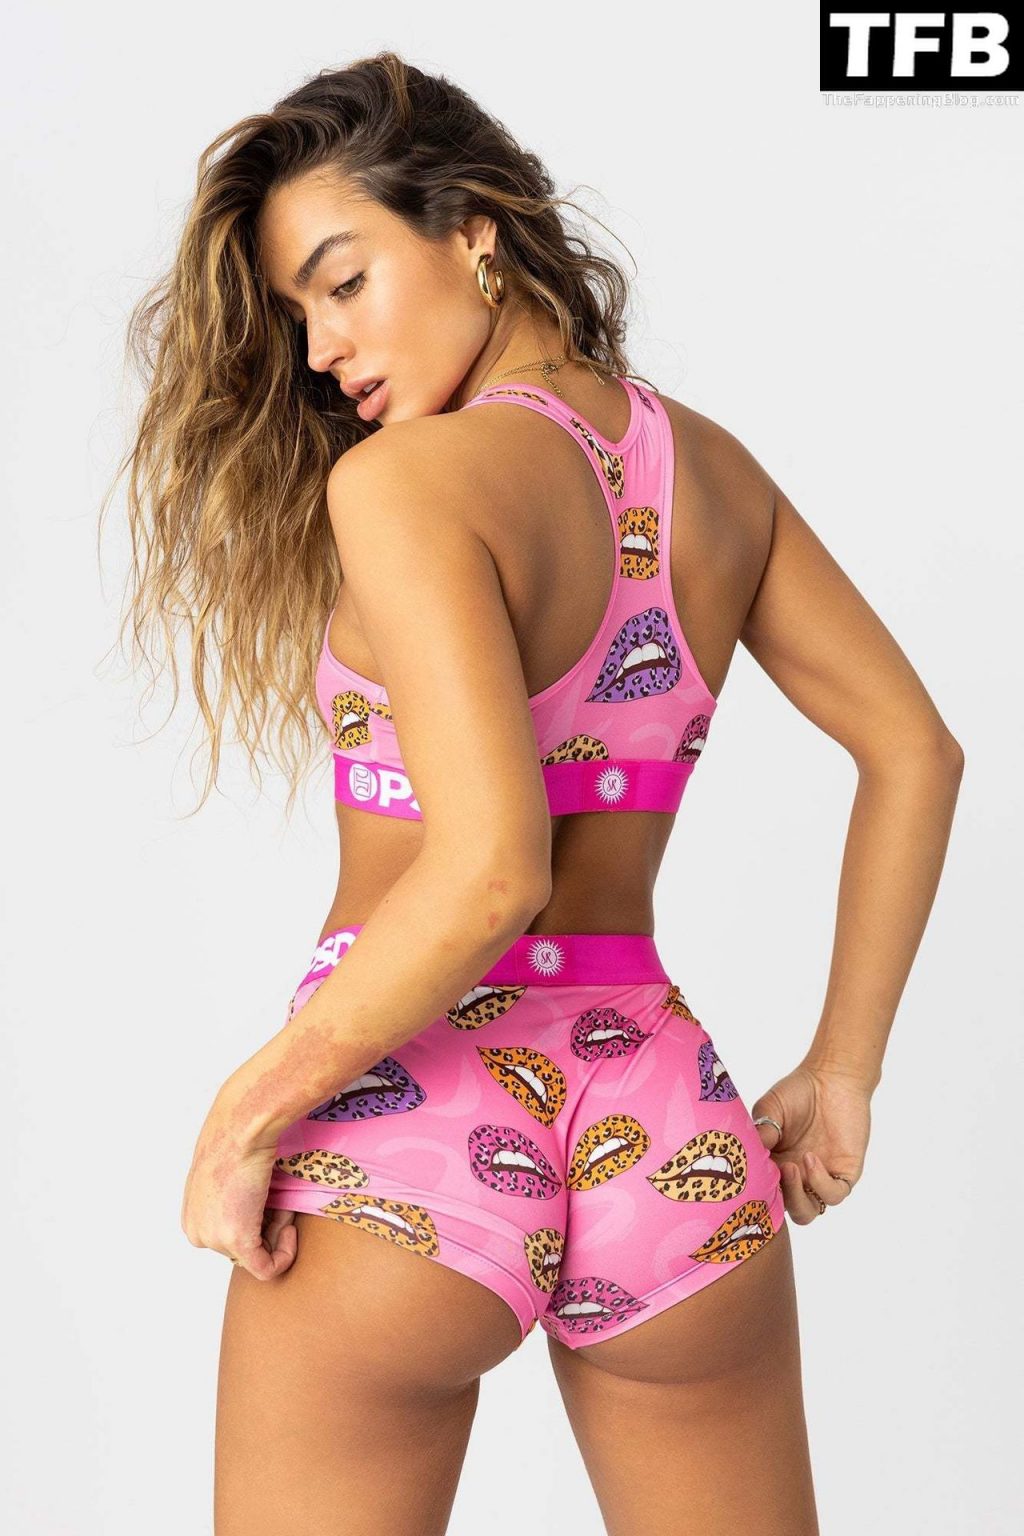 Sommer Ray Flaunts Her Fit Body in a New Shoot For Sommer Ray x PSD Collection (27 Photos)